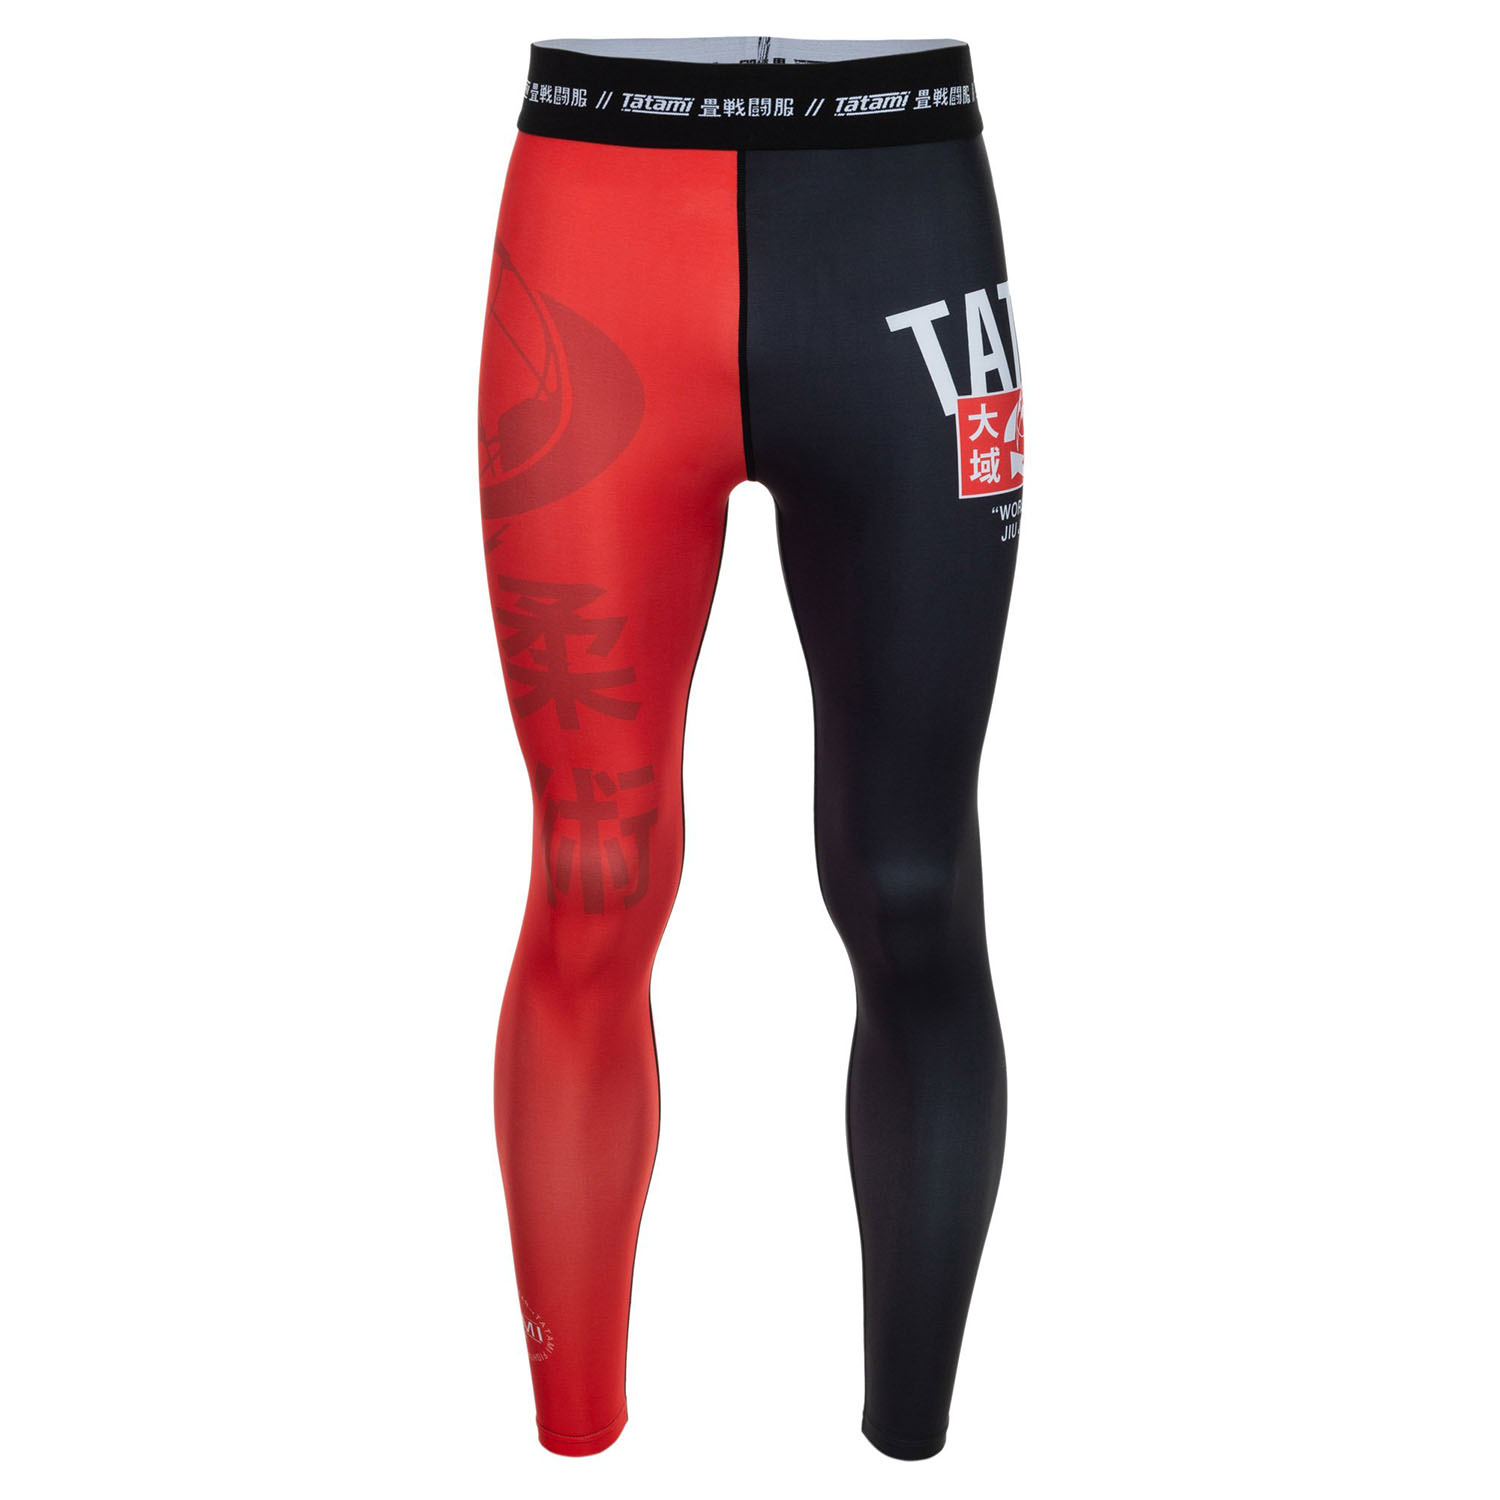 Tatami Compression Pants, Uncover, red-black